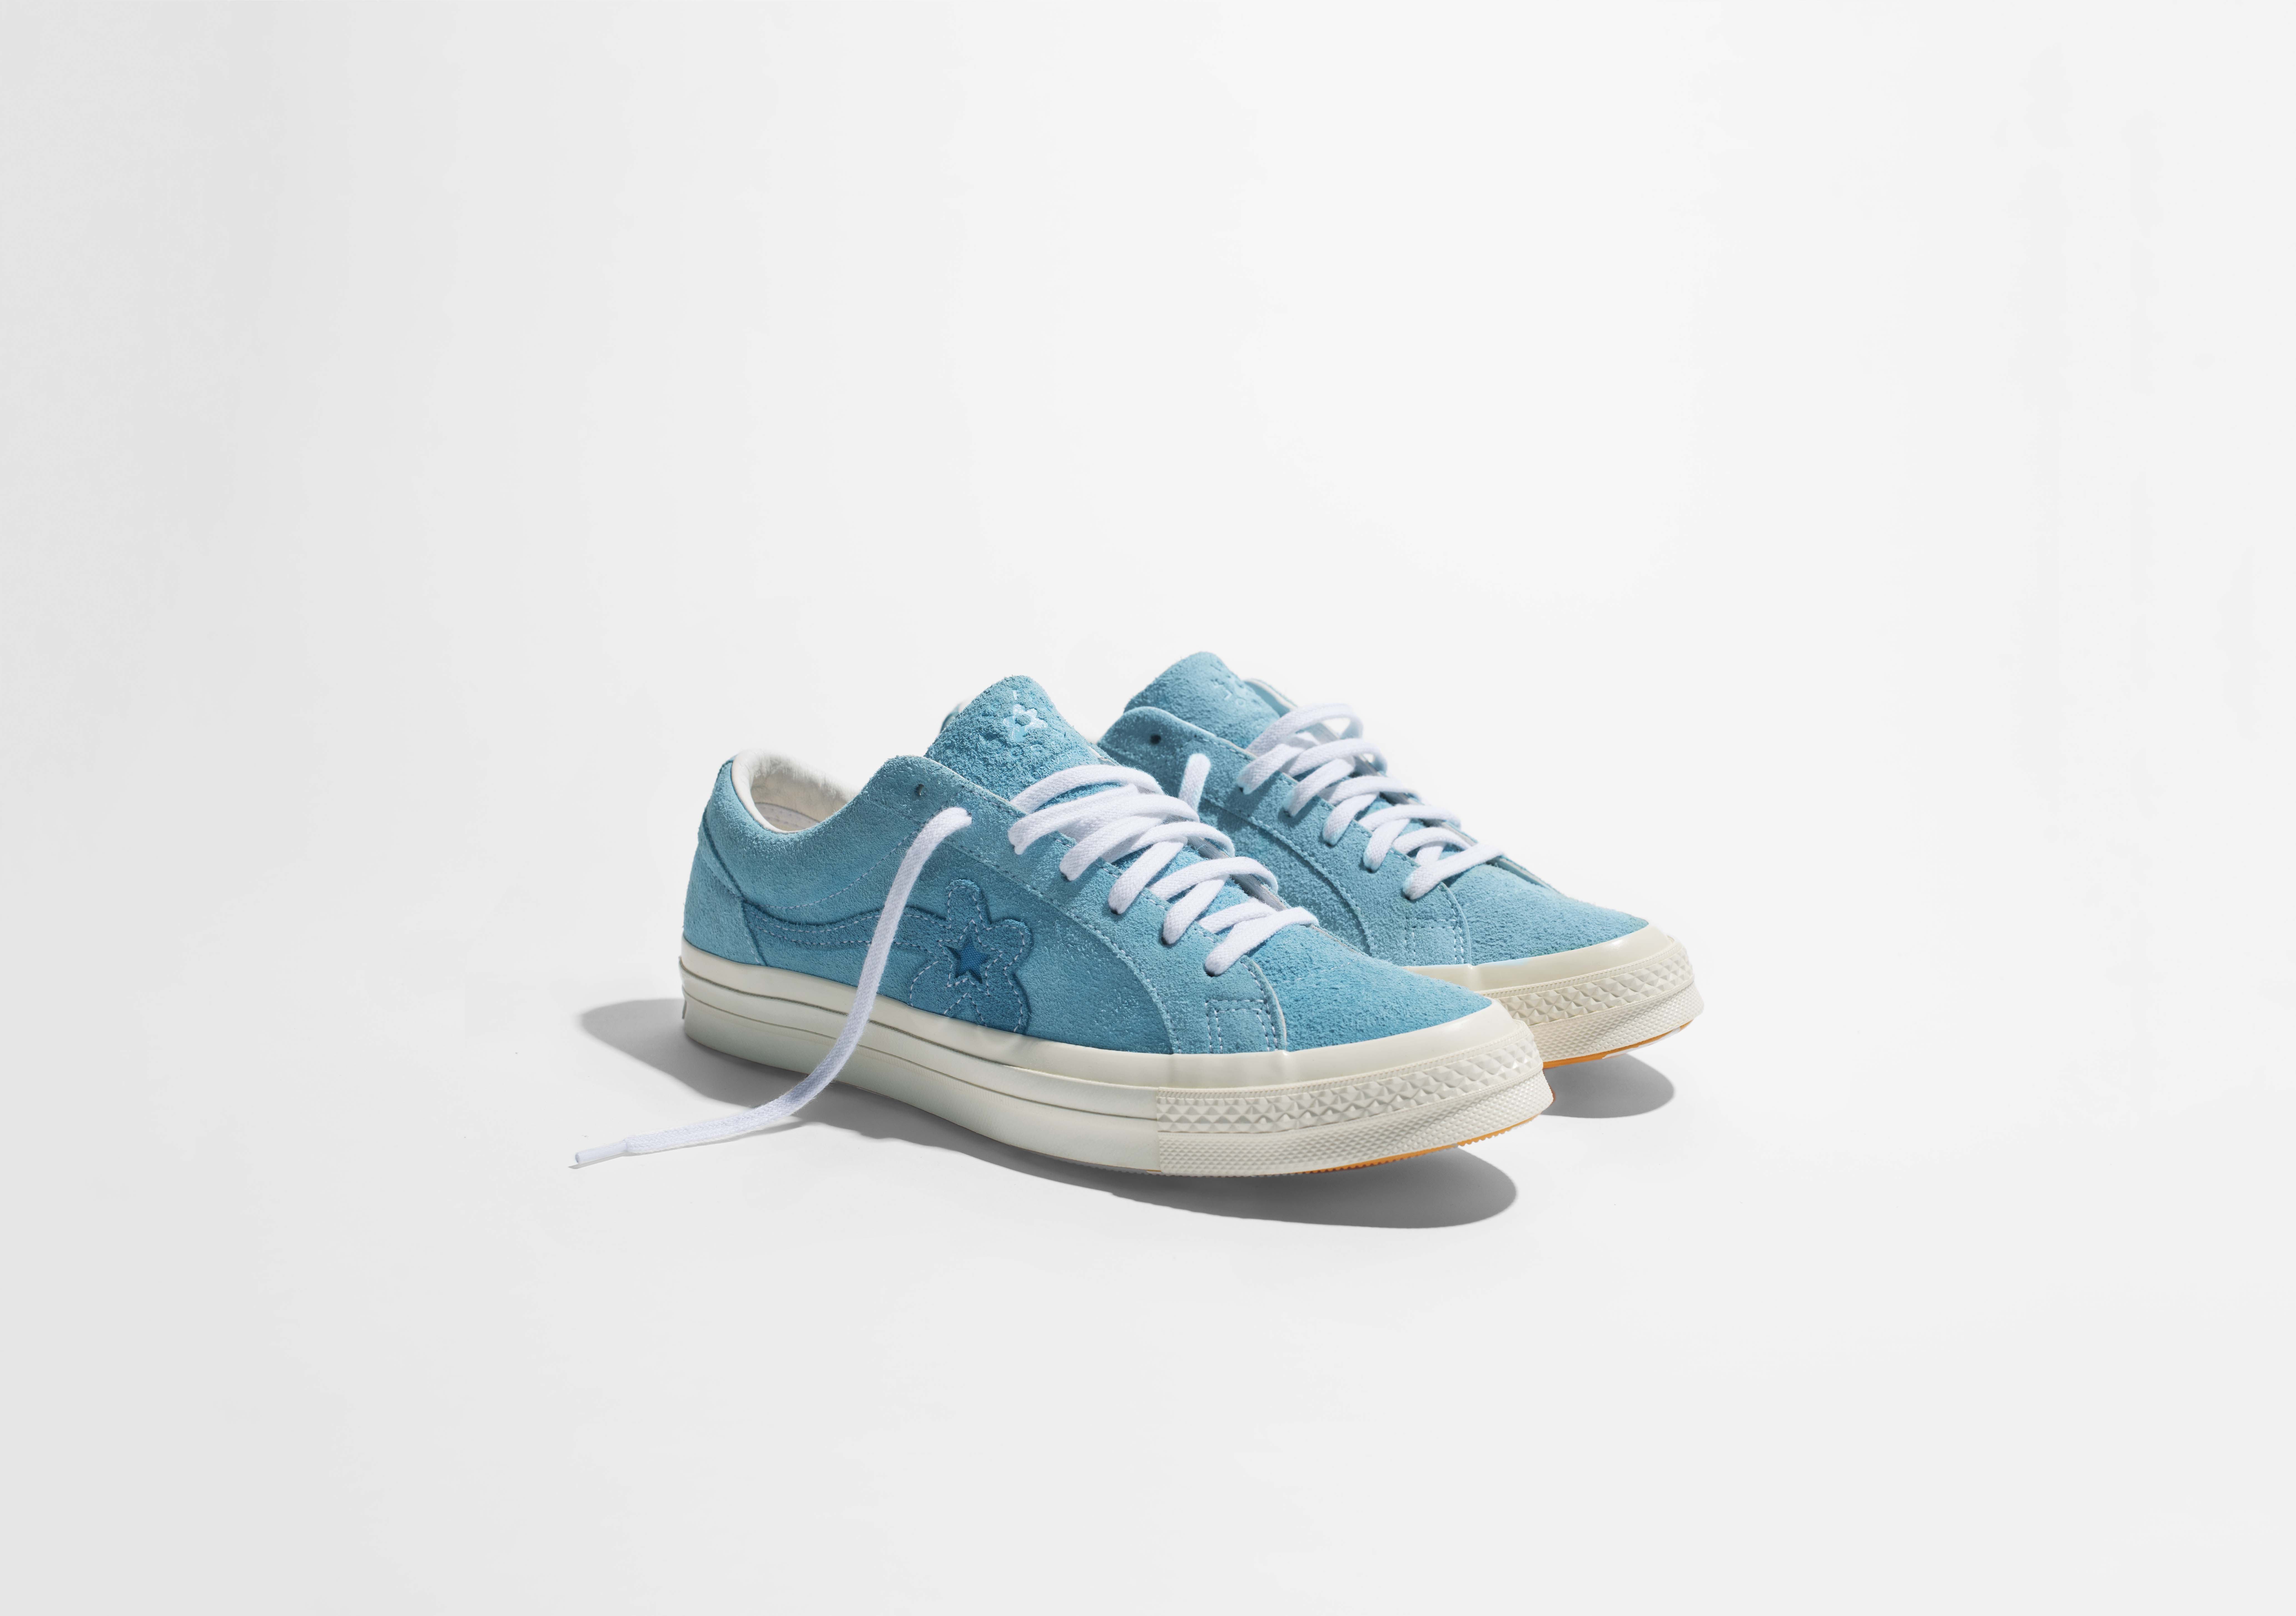 GOLF le FLEUR x Converse One Star Is CONFIRMED Coming To Malaysia - MASSES